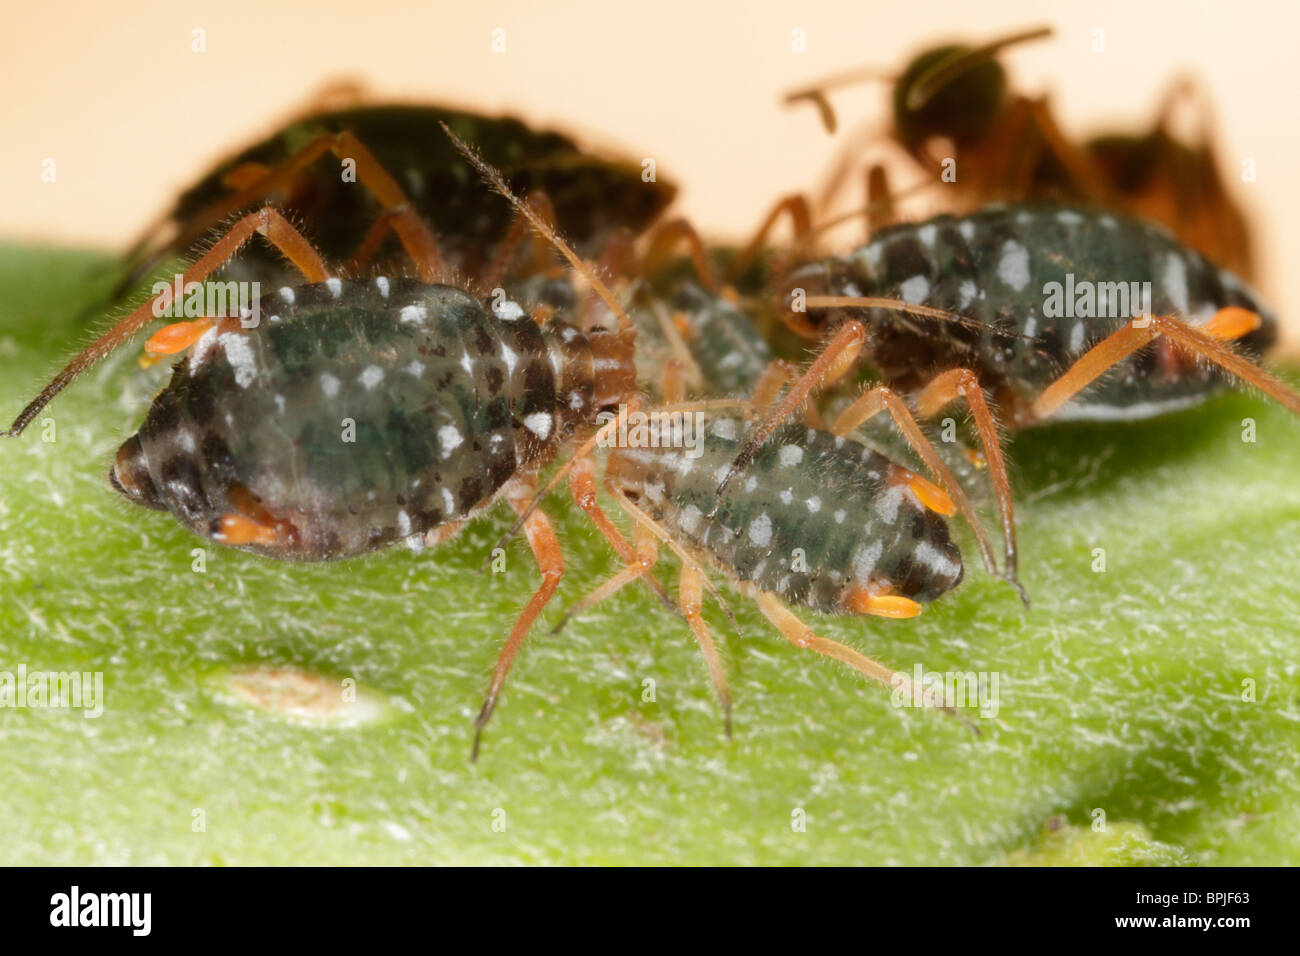 Pterocomma salicis (Black Willow Aphid), tended to by Black Garden Ants (Lasius niger) Stock Photo